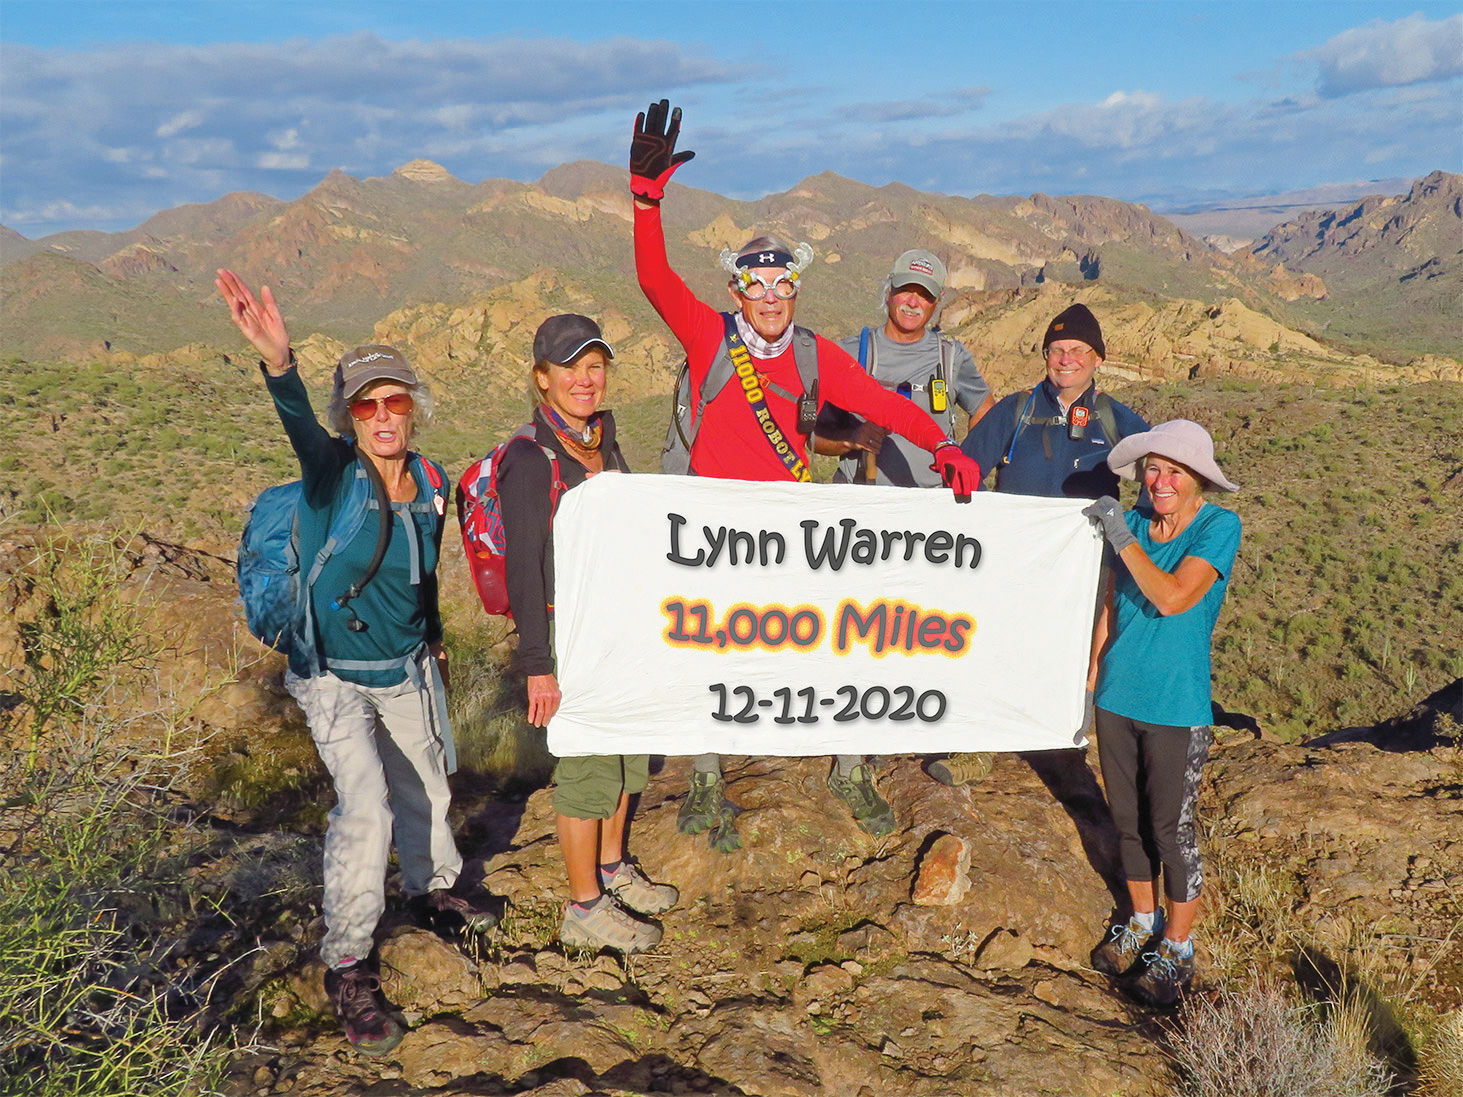 Left to right: Vicki Carter, Kris Raczkiewicz, Lynn Warren (photographer), Steve McElroy, Neal Wring, and Eileen Lords-Mosse celebrating the milestone in Goldfields Mountains’ scenic Willow Springs Canyon.